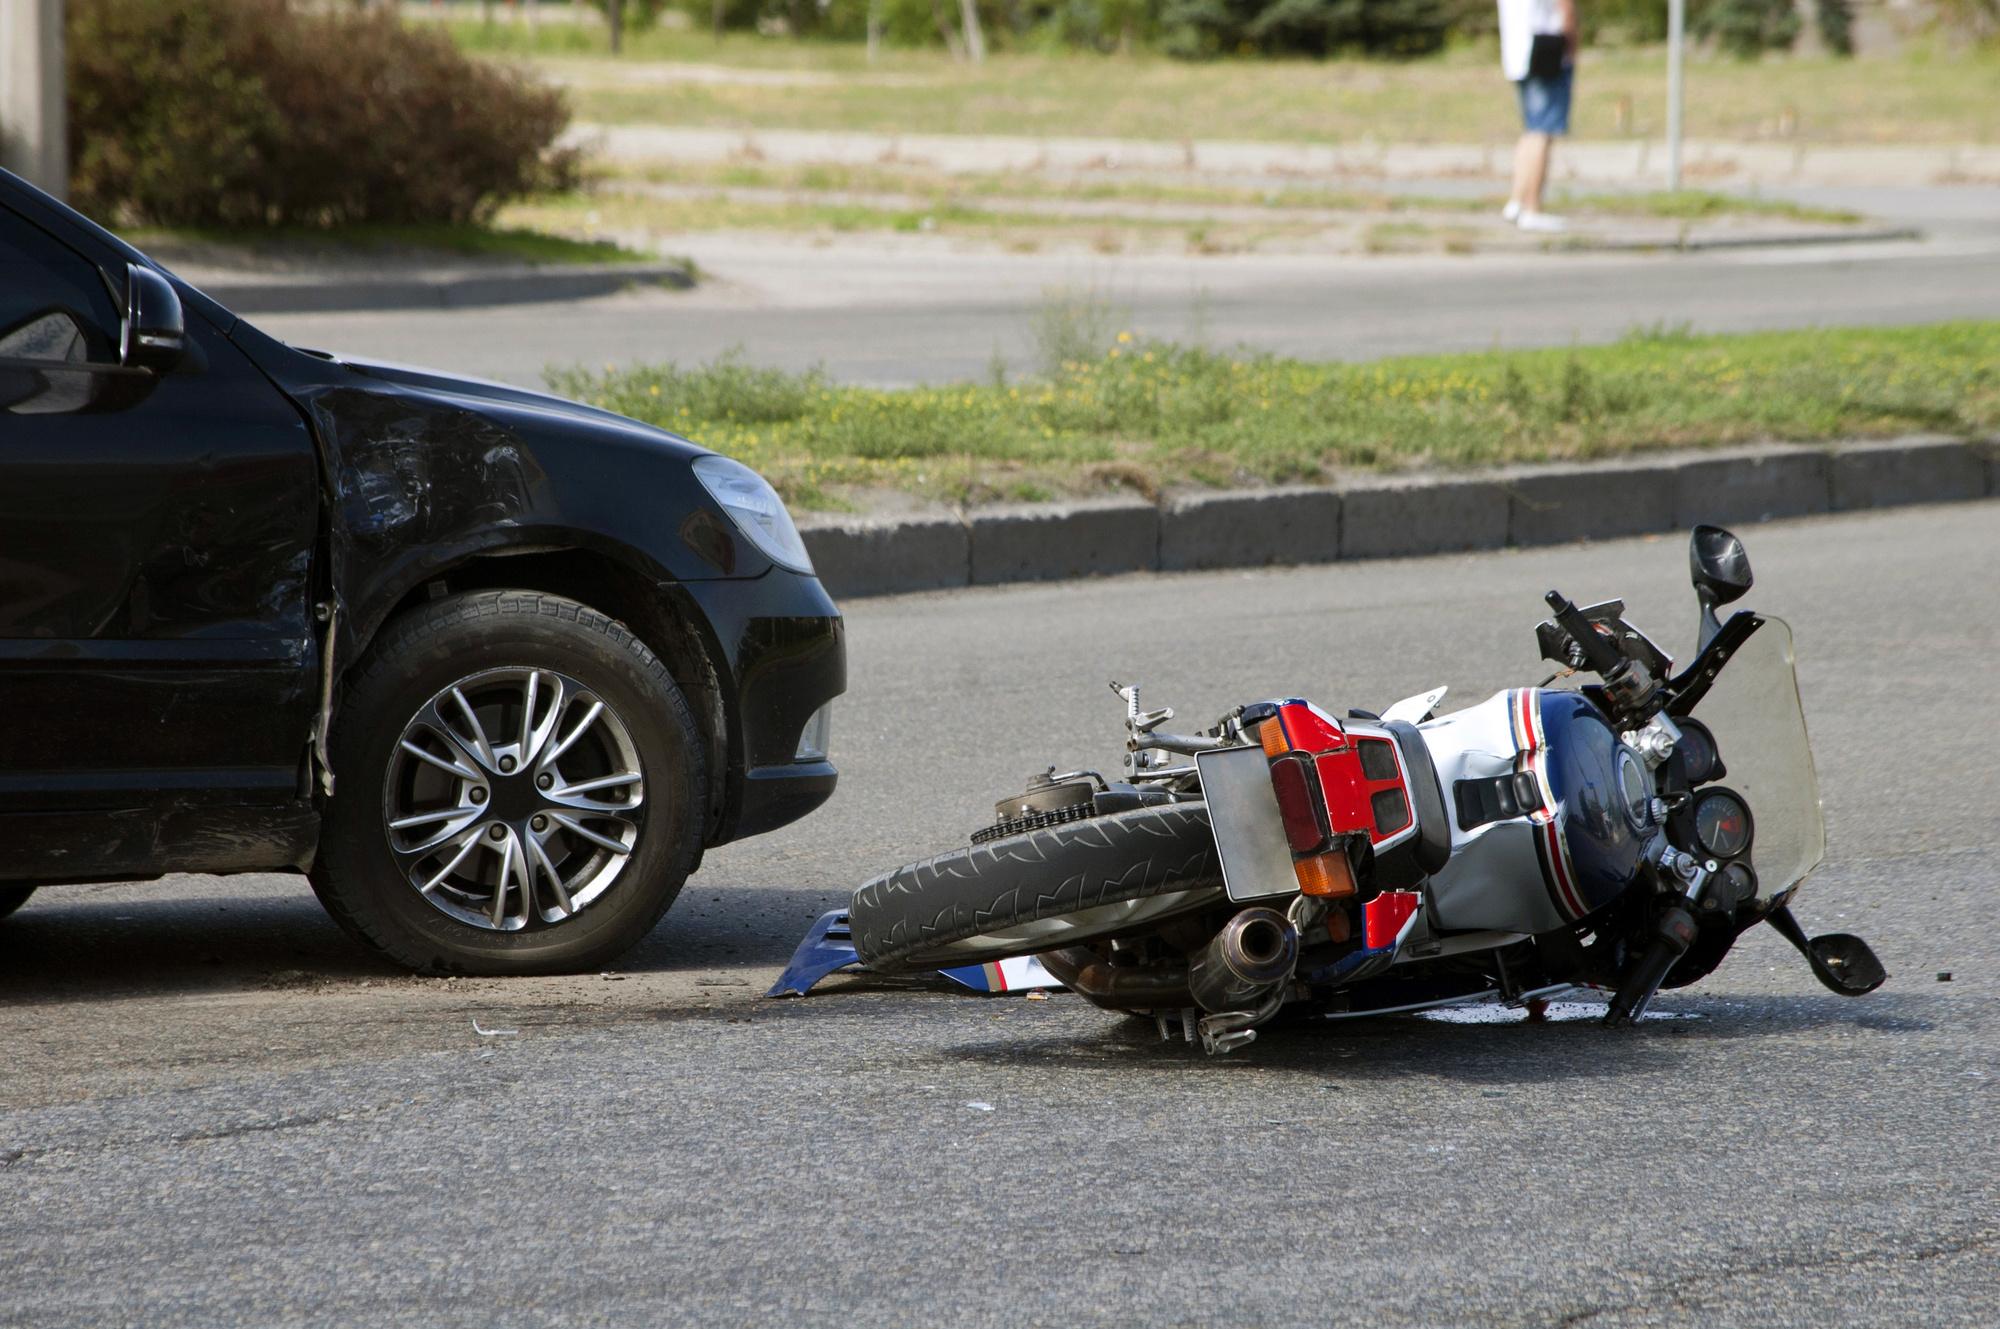 Role of Accident Reconstruction in Motorcycle Injury Cases